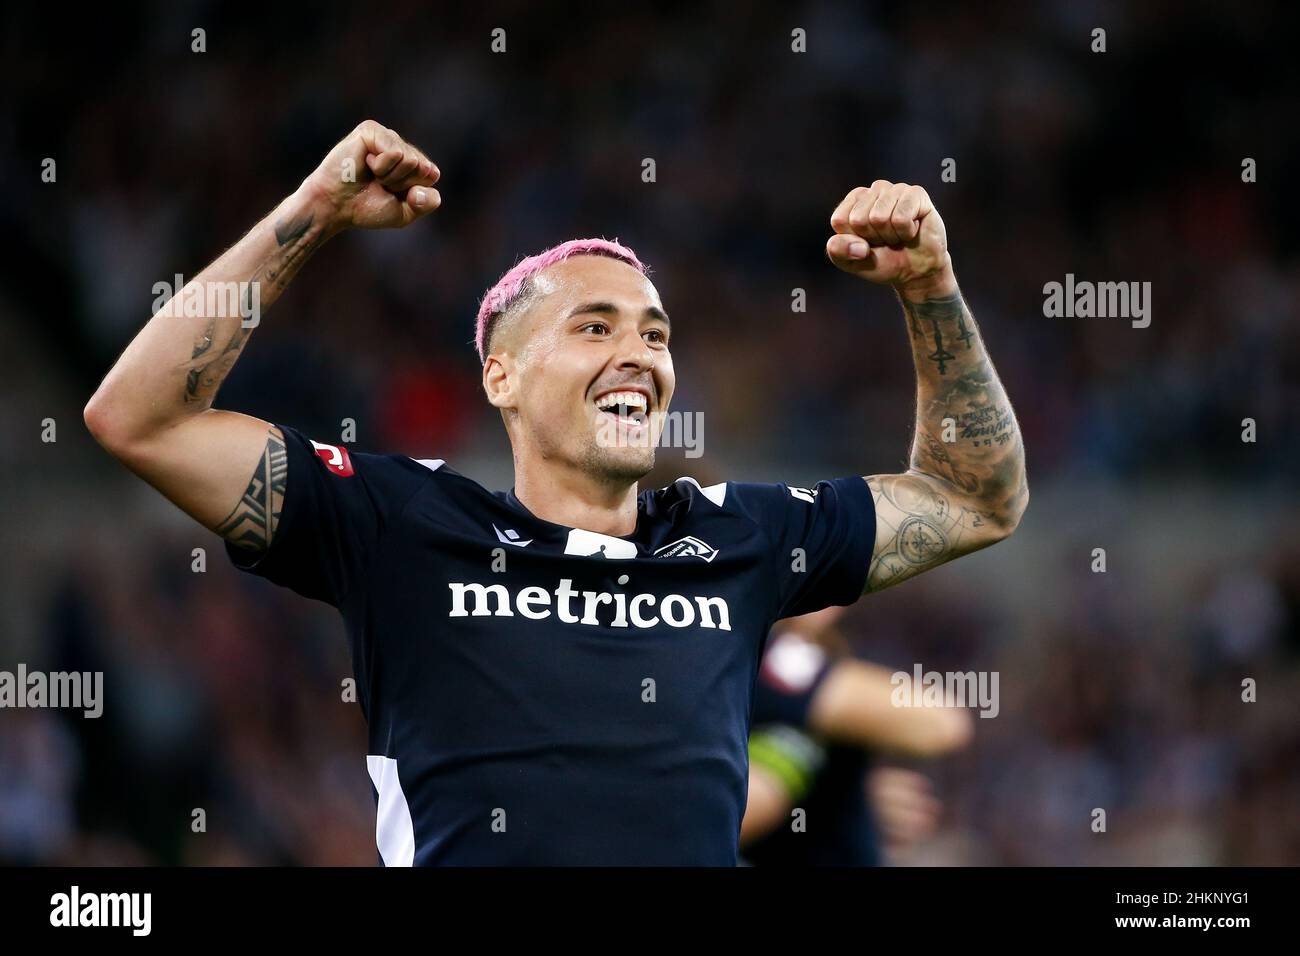 Melbourne, Australia, 5 February, 2022. Jason Davidson of Melbourne Victory celebrates winning the FFA Cup Final soccer match between Melbourne Victory and Central Coast Mariners. Credit: Dave Hewison/Speed Media/Alamy Live News Stock Photo